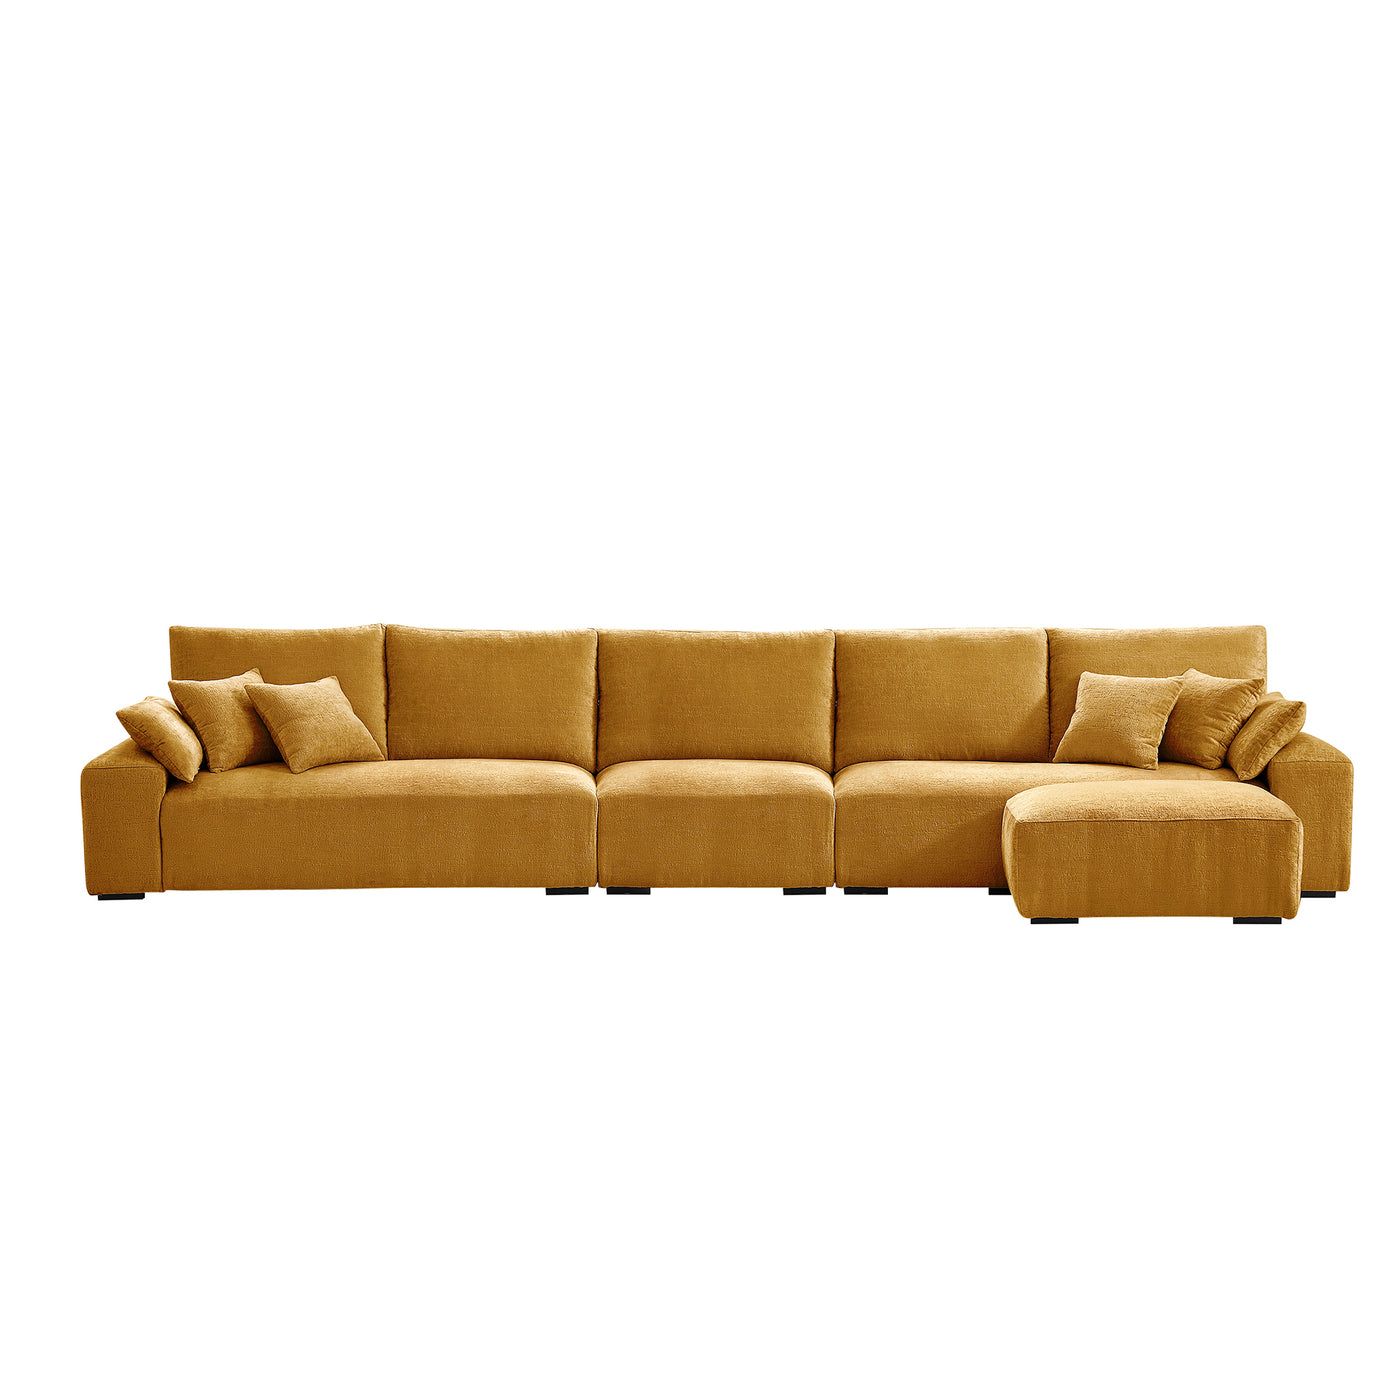 The Empress Beige Sofa and Ottoman-Yellow-175.6"